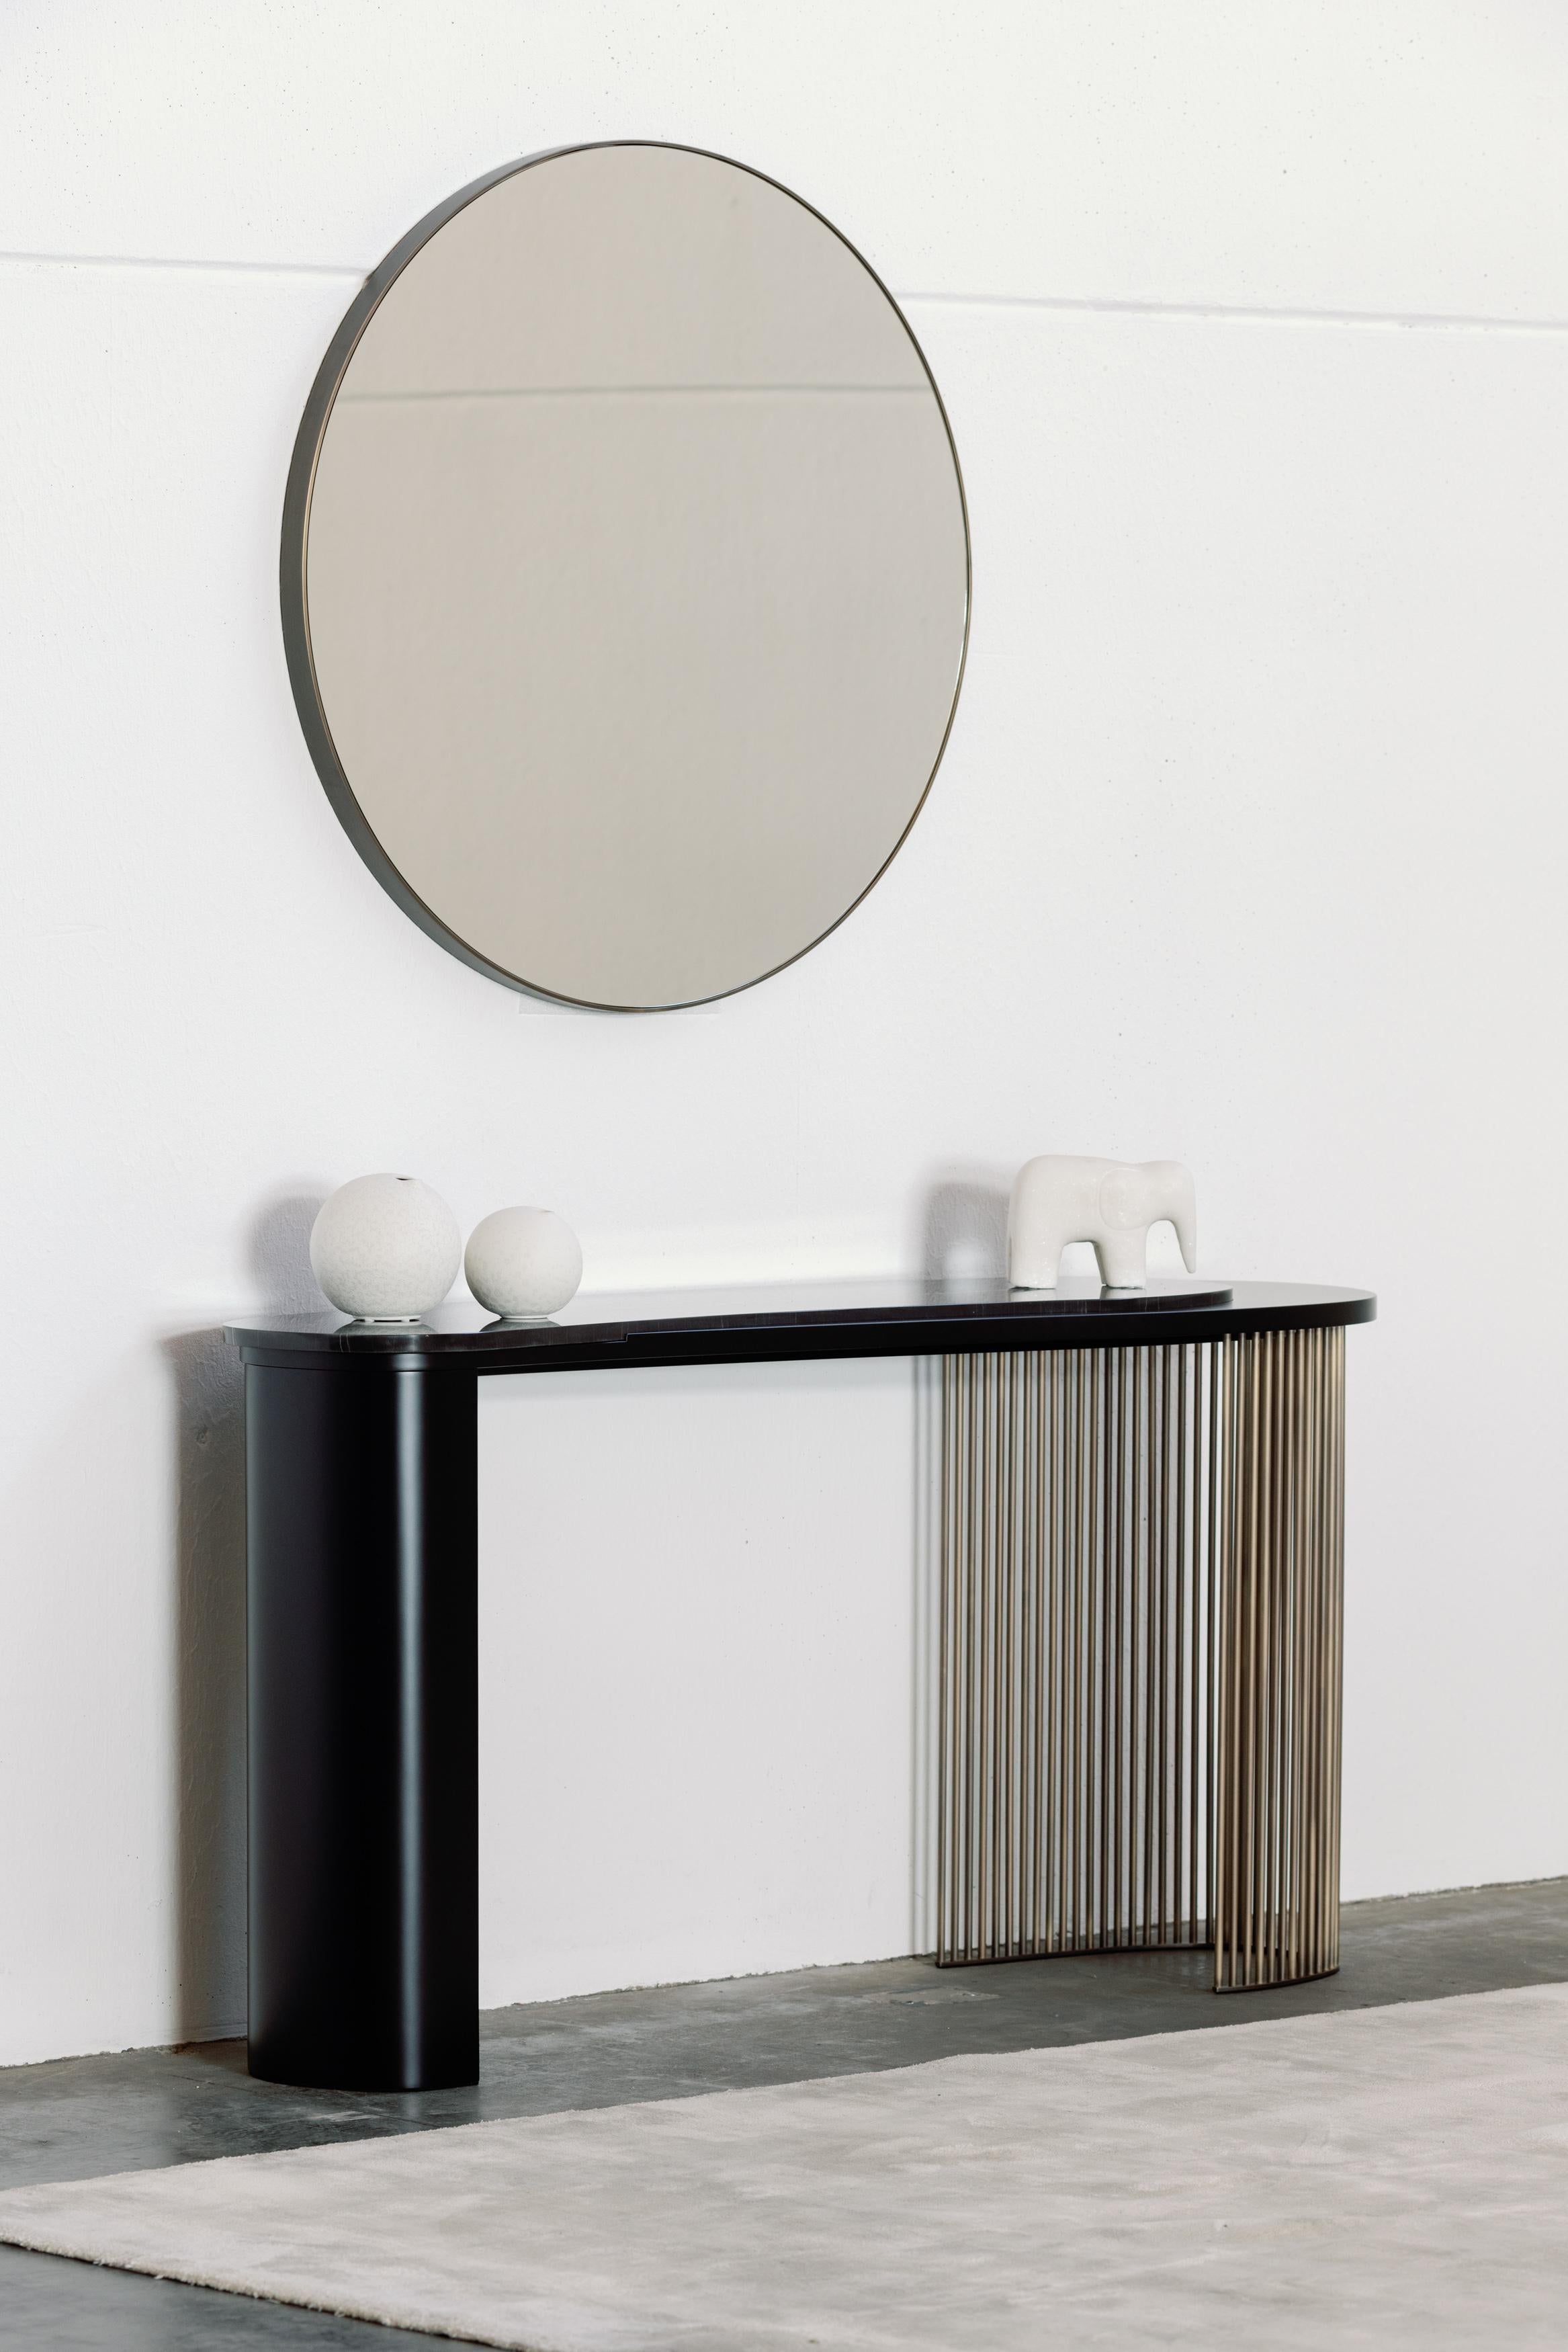 Castelo Console, Contemporary Collection, Handcrafted in Portugal - Europe by Greenapple.

Designed by Rute Martins for the Contemporary Collection, the Castelo modern console table pays homage to the castles that have played an important role in